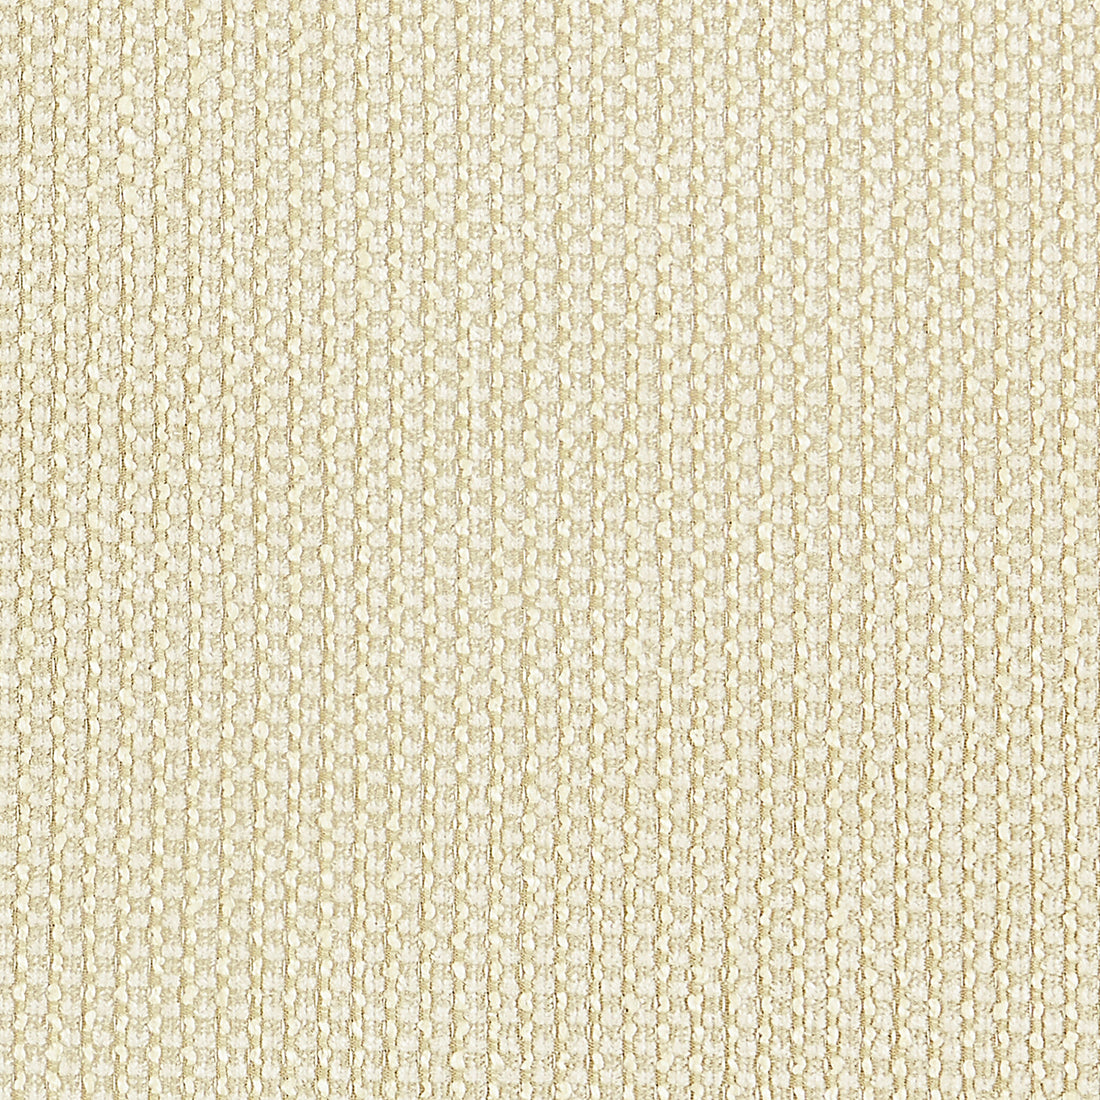 Elixer fabric in snowflake color - pattern number W80206 - by Thibaut in the Kaleidoscope Fabrics collection